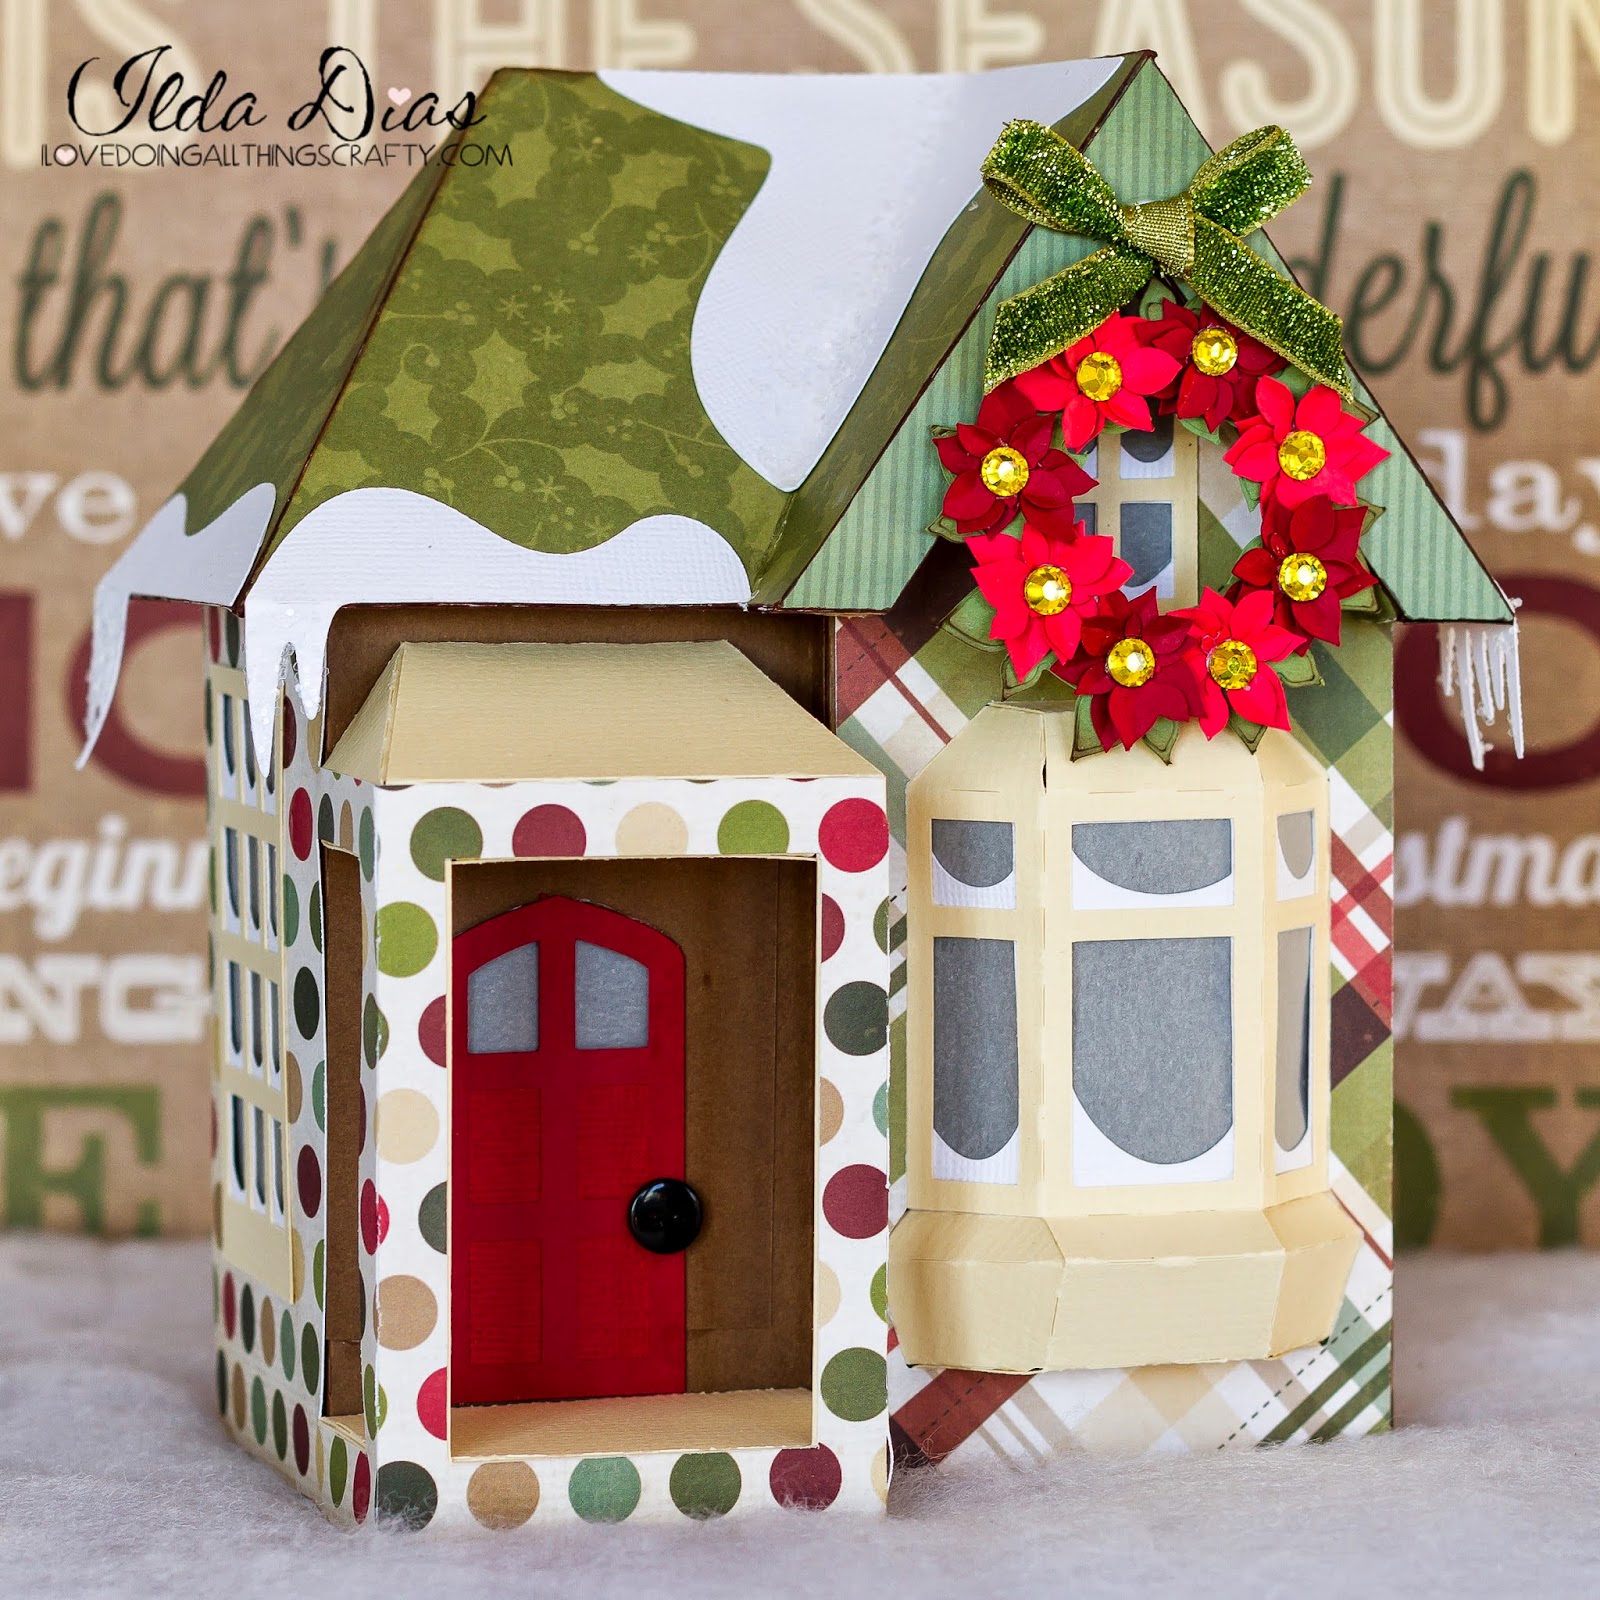 Download I Love Doing All Things Crafty: 3D Snowy House Box